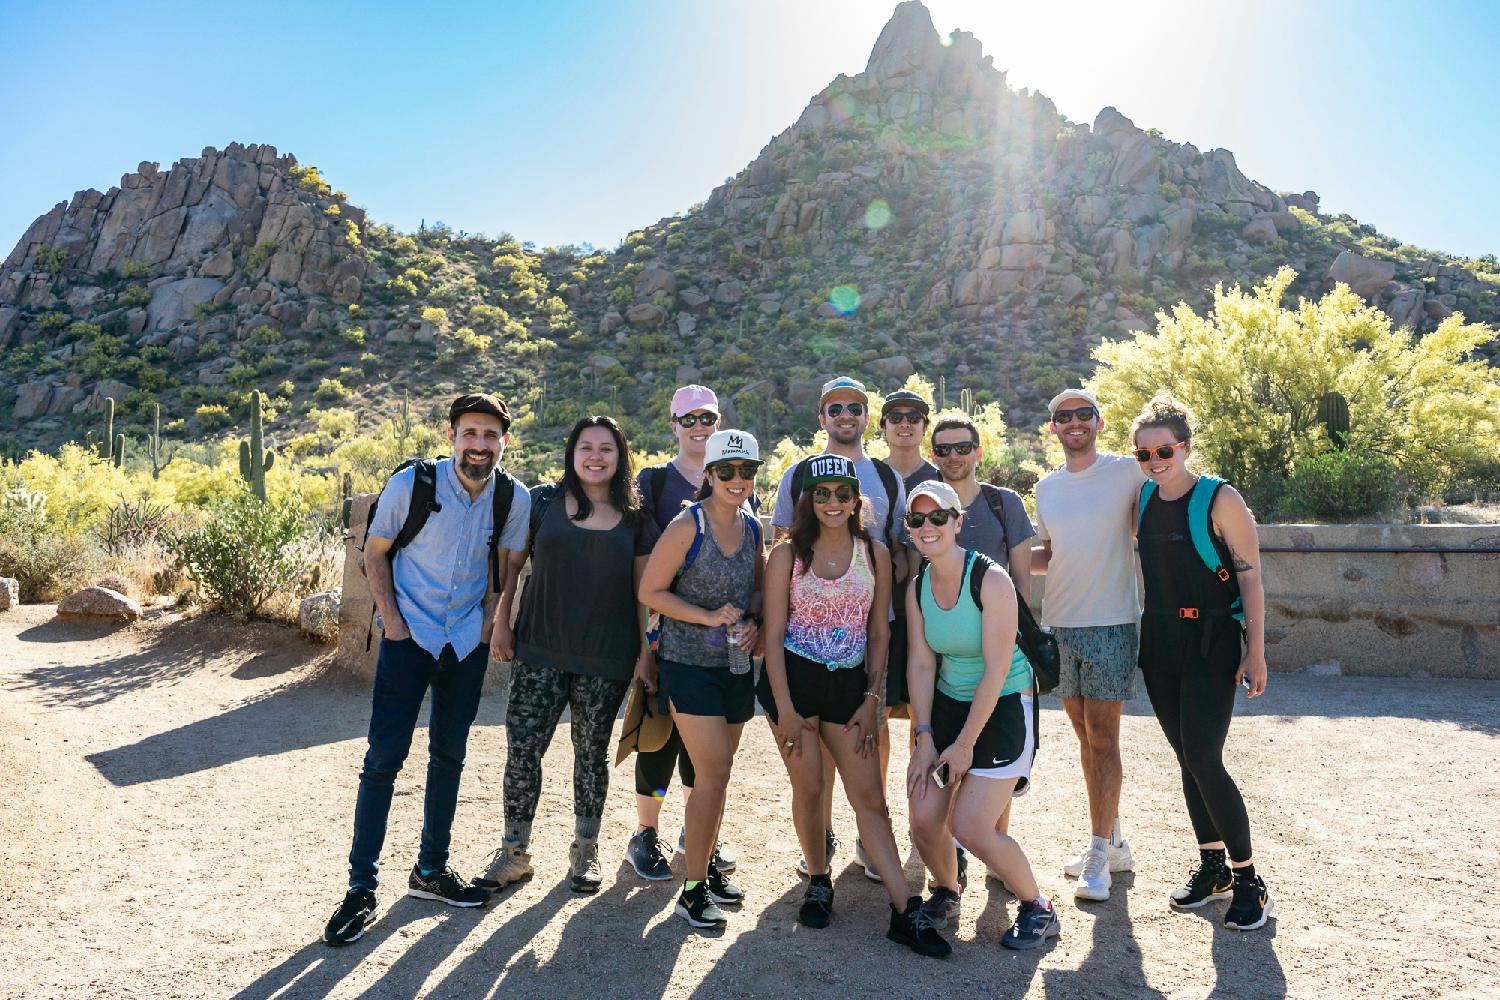 The team in Arizona on our work retreat!